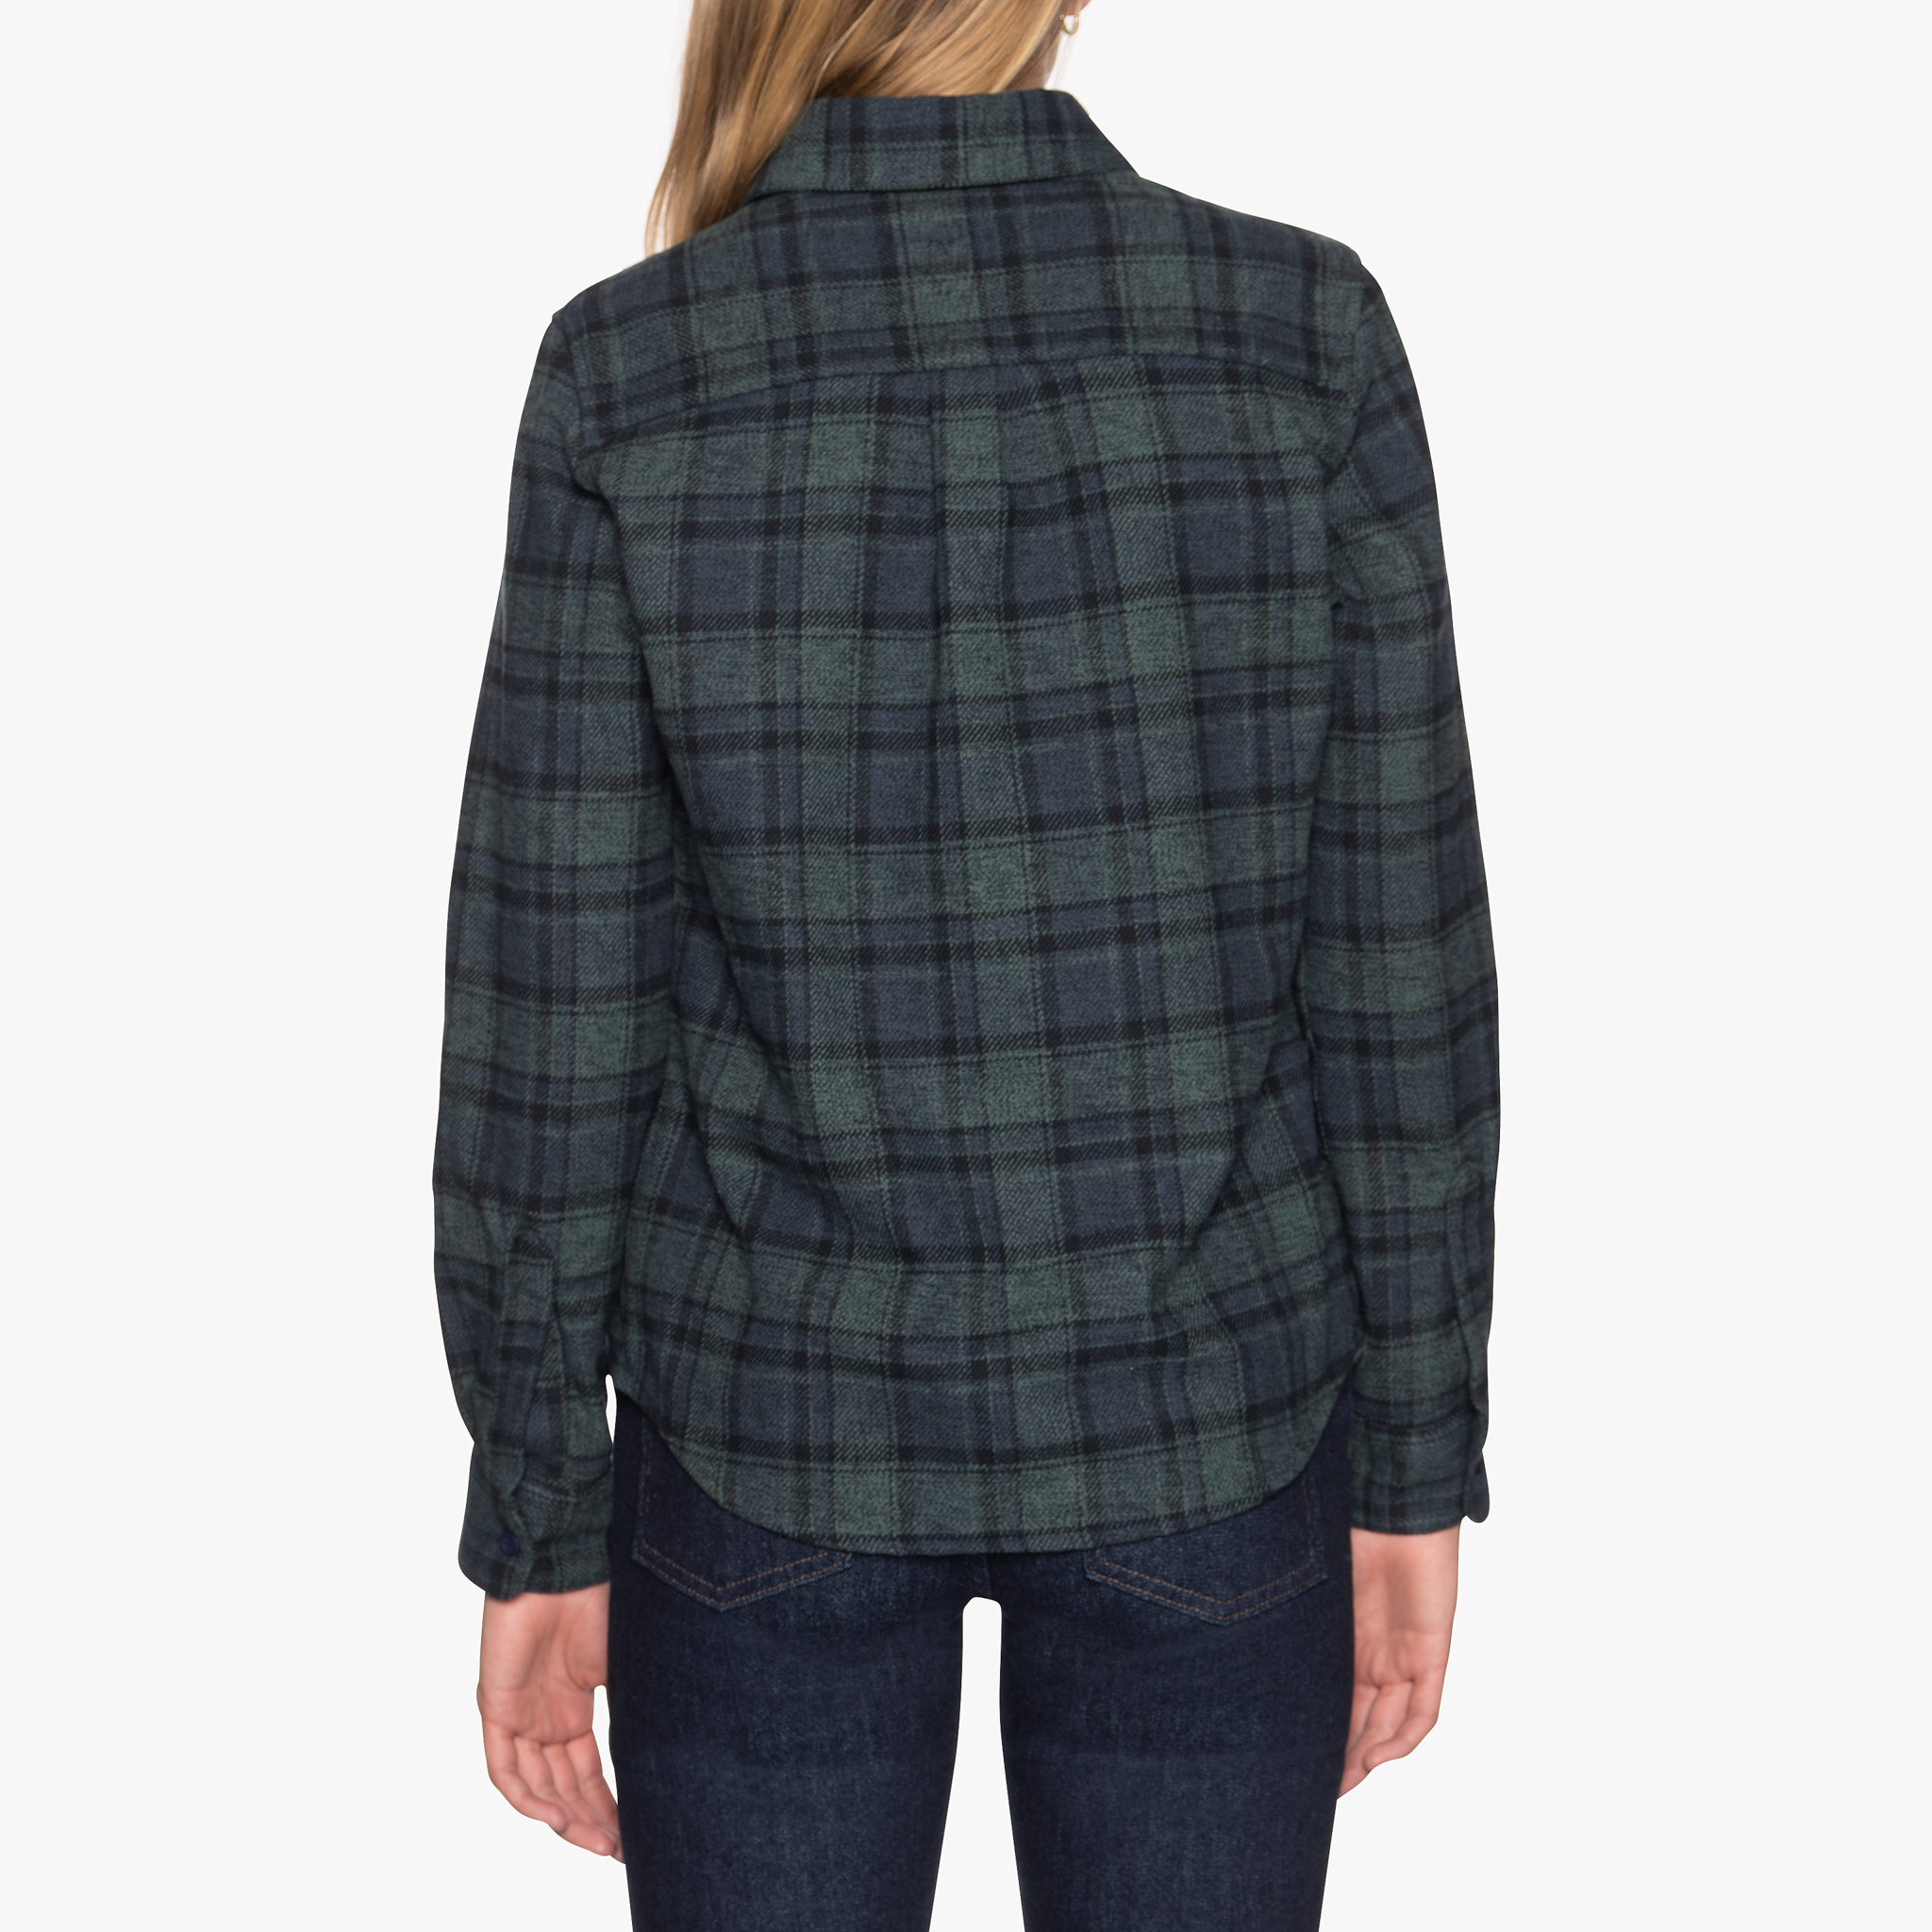  Women’s Country Shirt - Heavy Vintage Flannel - Blue/Green - back 